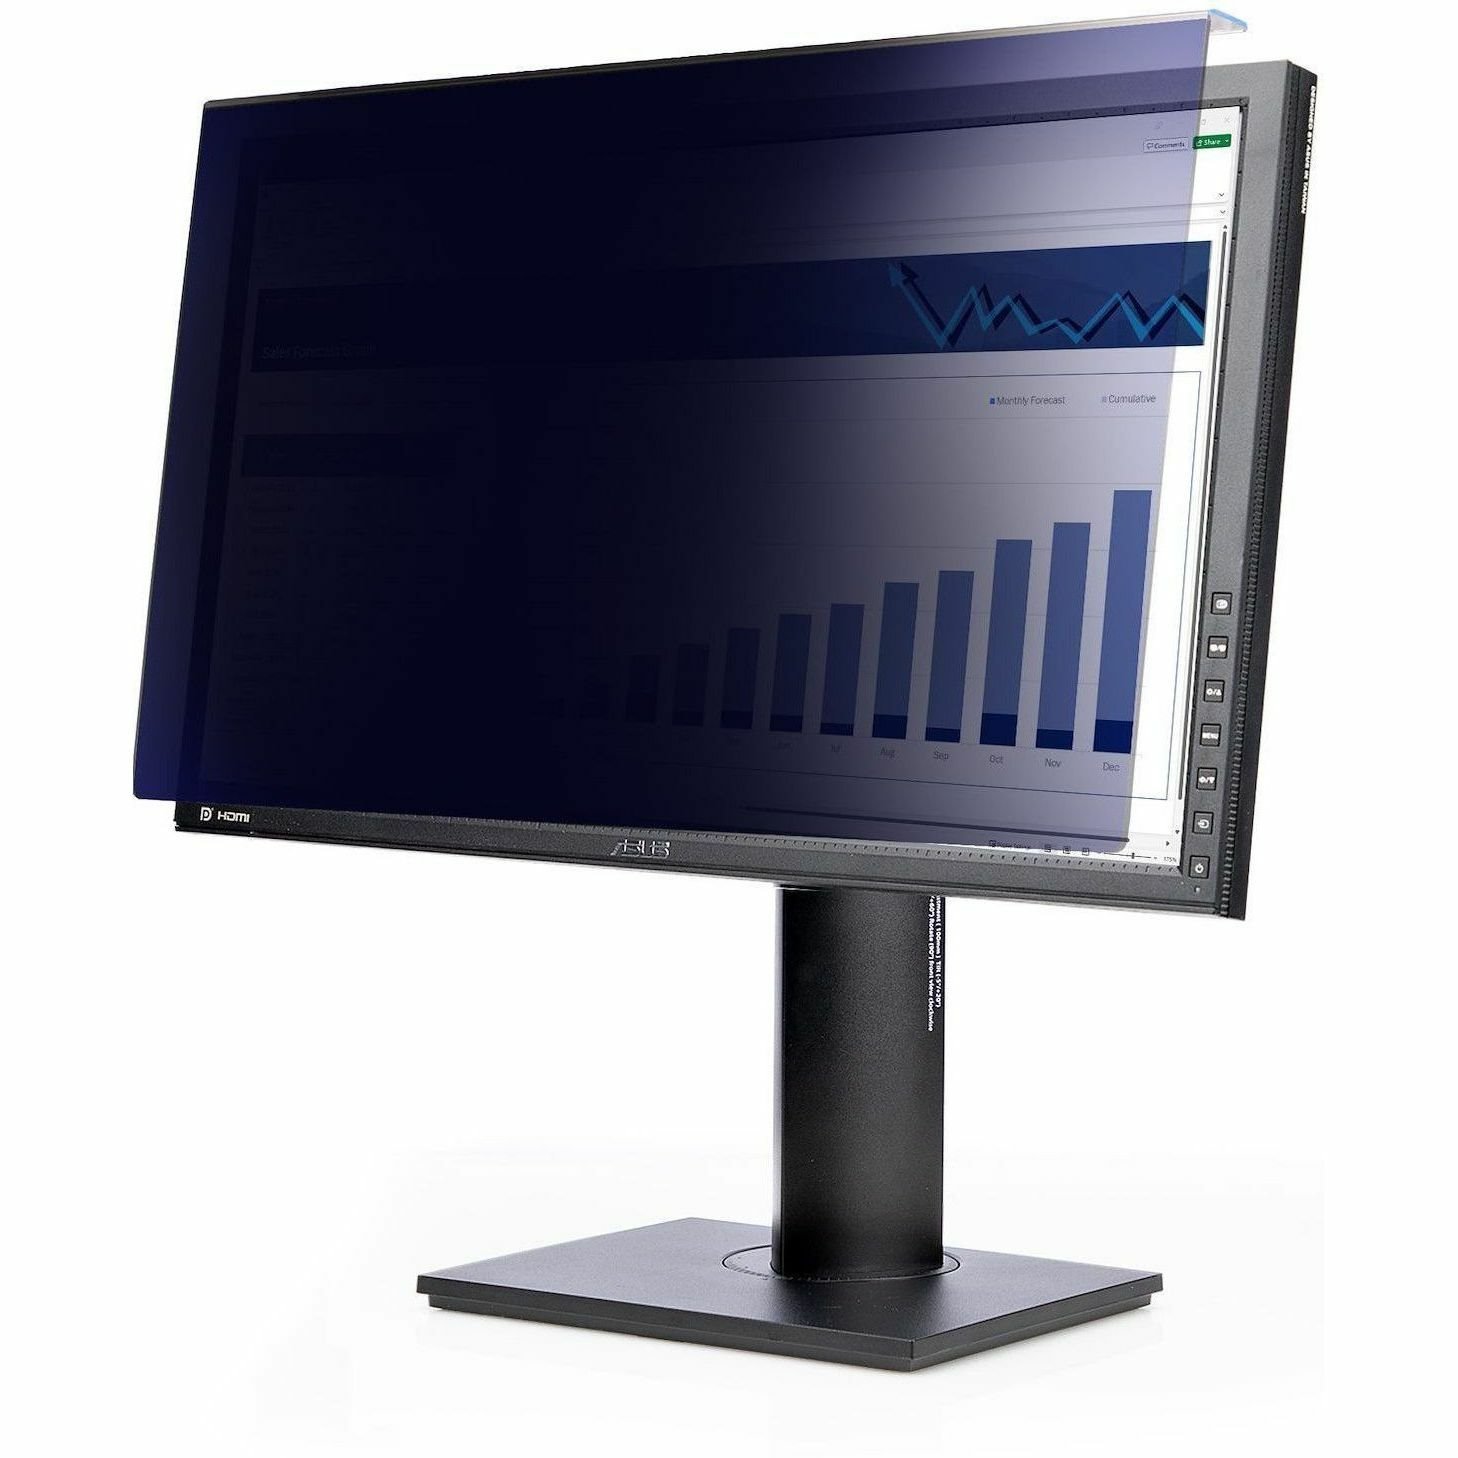 StarTech.com 24-inch 16:10 Computer Monitor Privacy Screen, Hanging Acrylic Filter, Monitor Screen Protector/Shield, +/- 30 Deg., Glossy